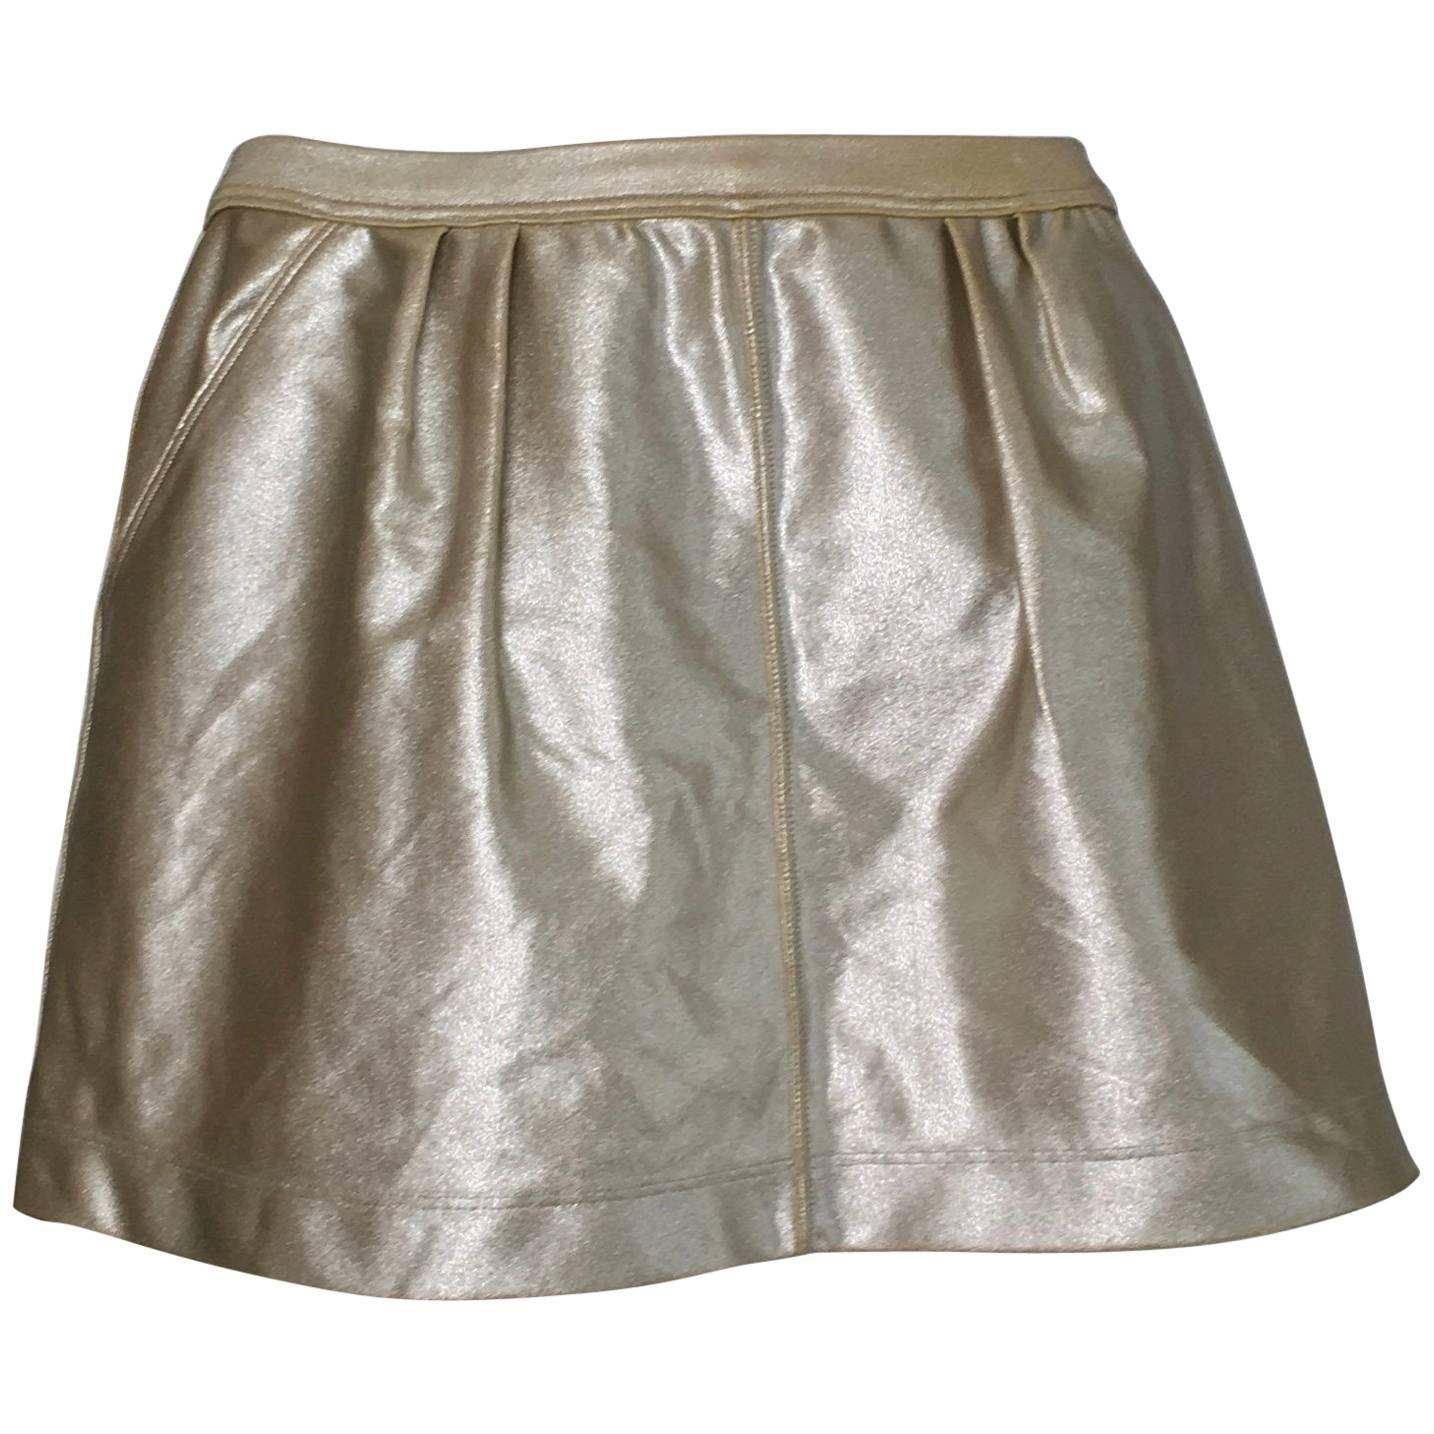 Tomas Maier Gold Lycra Miniskirt with Pockets Size 4, made in Italy  For Sale